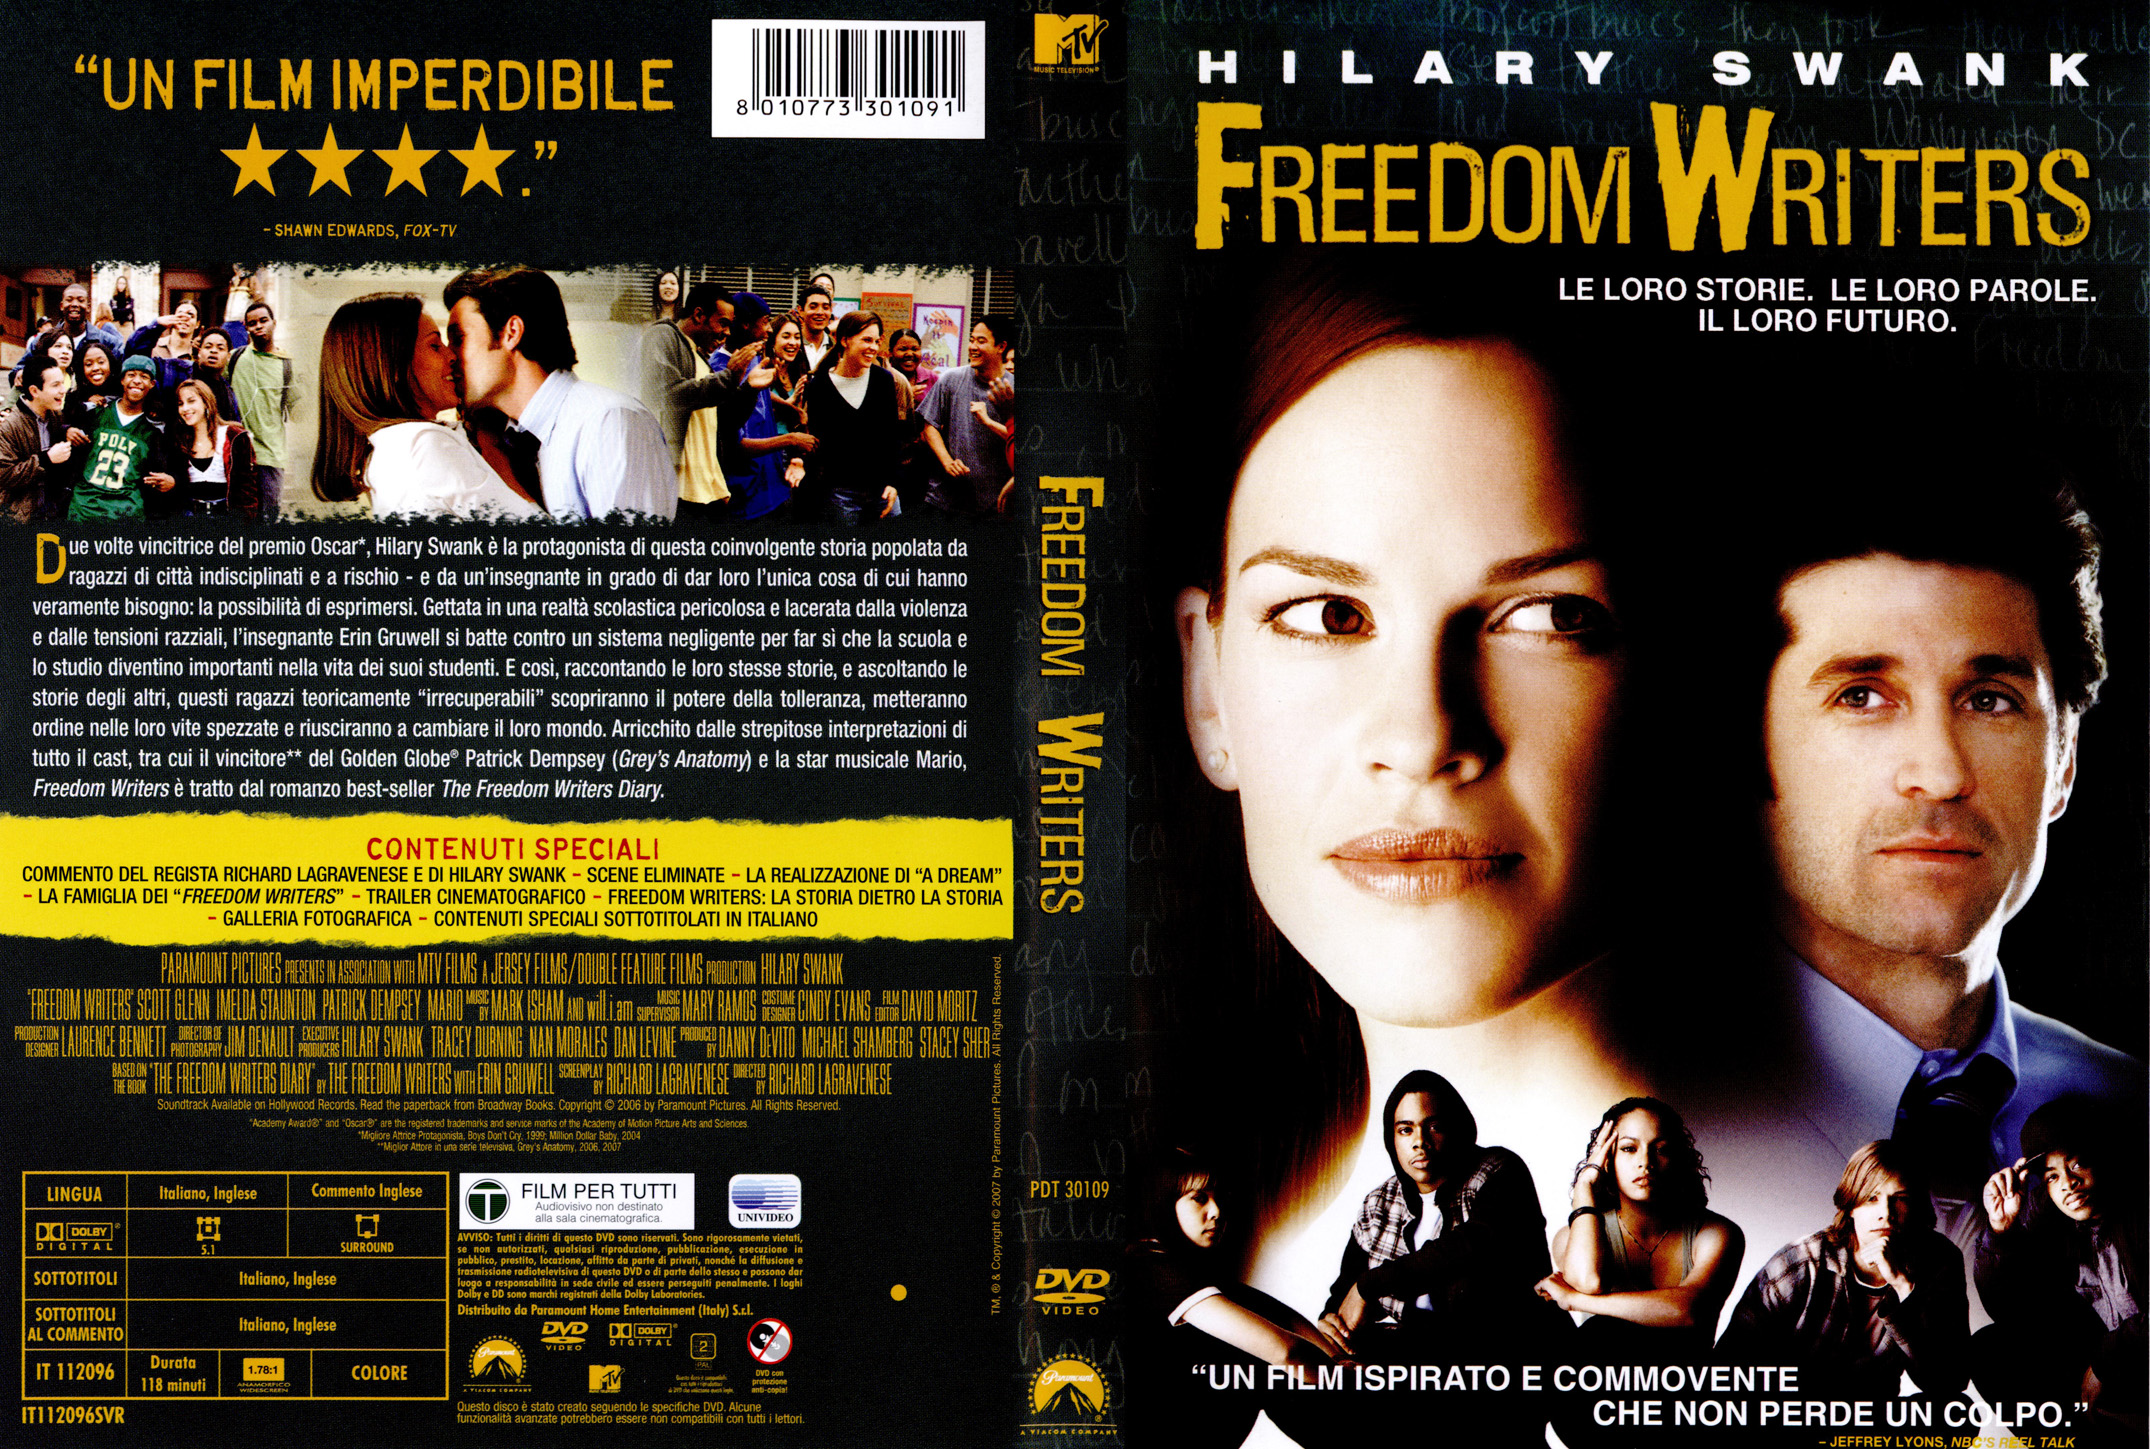 My simple contemplation: Freedom Writers 1